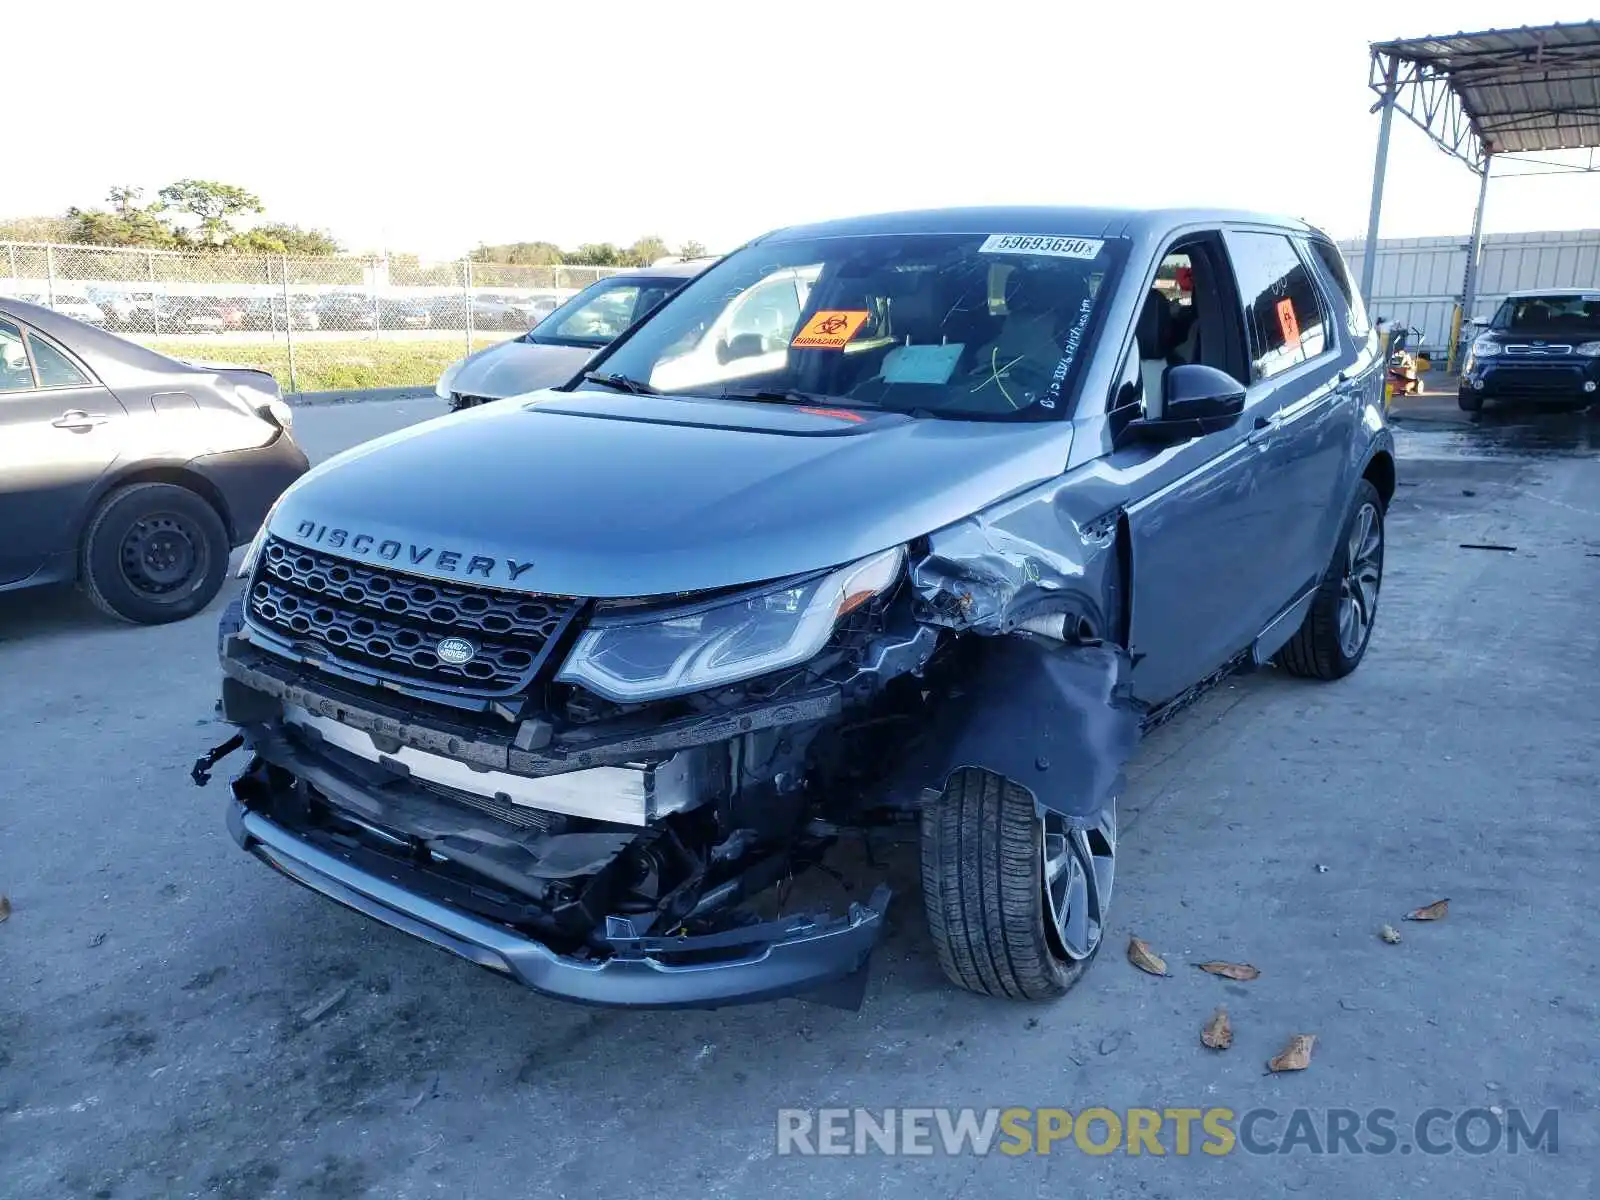 2 Photograph of a damaged car SALCL2FX5LH853223 LAND ROVER DISCOVERY 2020